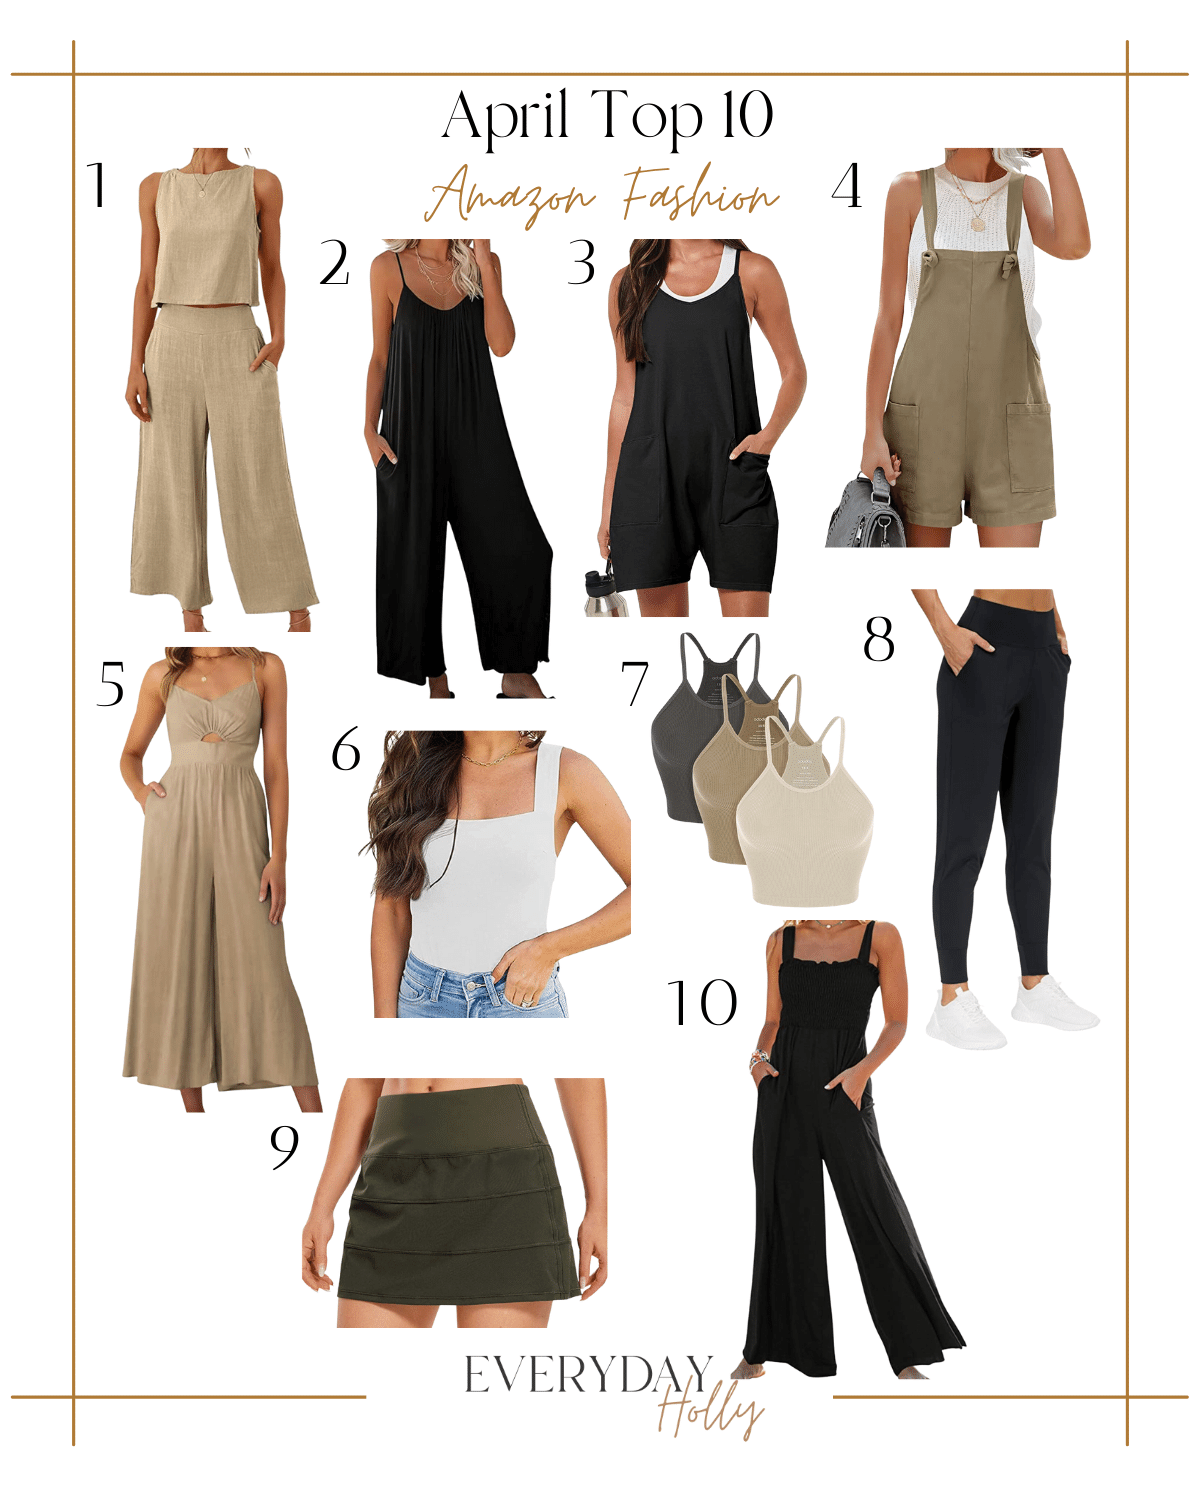 amazon fashion, best sellers, top 10 favorites, romper, jumpsuit, overalls, bodysuits, cropped tanks, joggers, tennis skirt, wide leg jumpsuit, summer fashion, spring fashion 